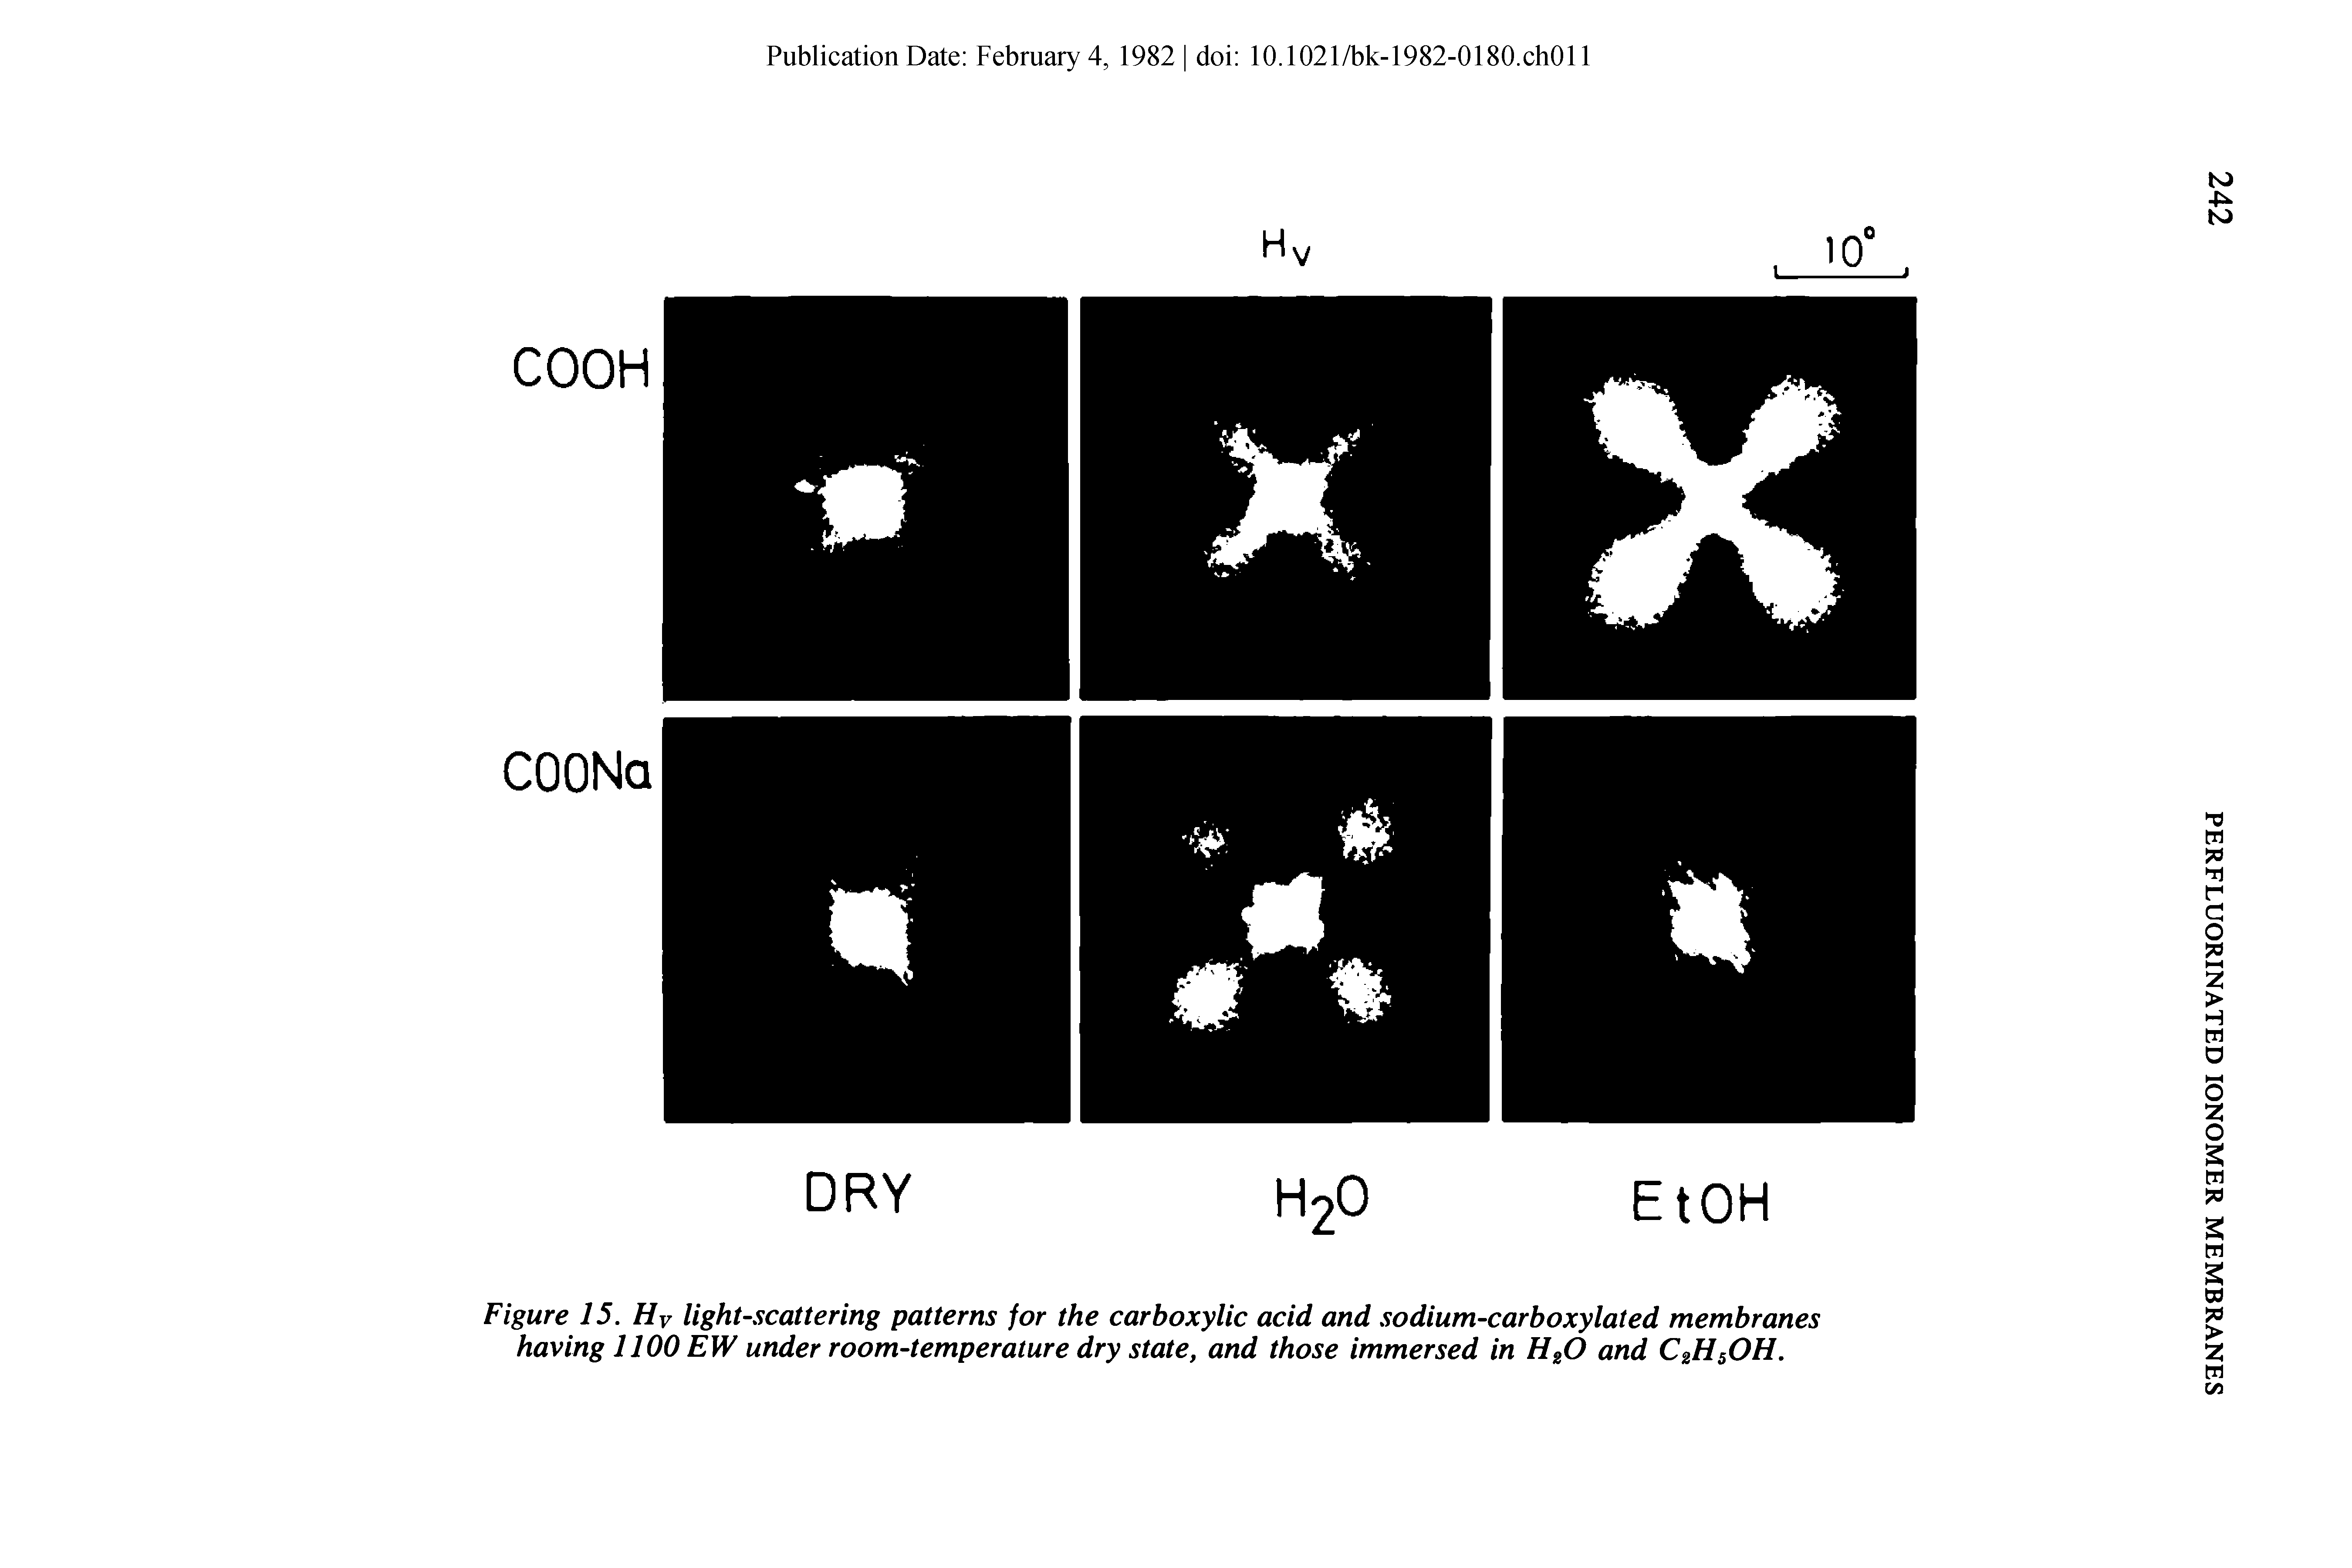 Figure 15. Hv light-scattering patterns for the carboxylic acid and sodium-carboxylated membranes having 1100 EW under room-temperature dry state, and those immersed in HzO and C2H5OH.